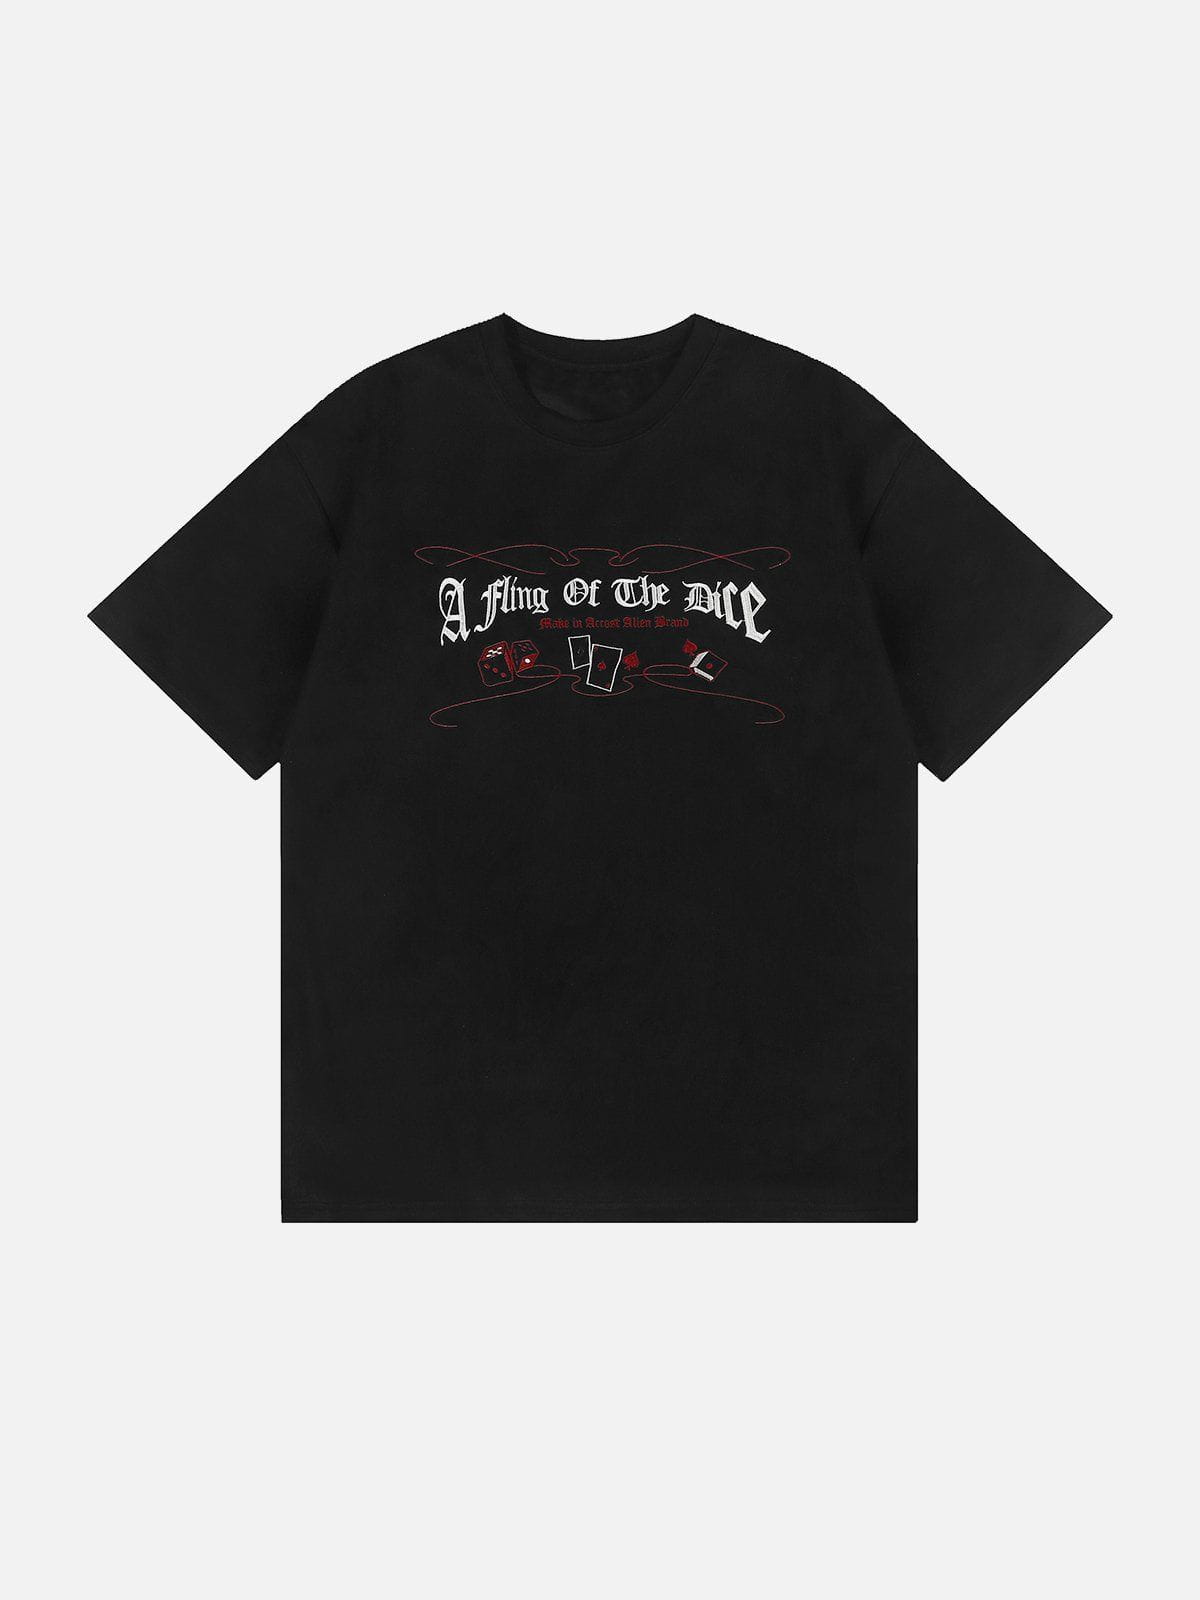 Sneakerland™ - Dice Poker Embroidered Suede Tee